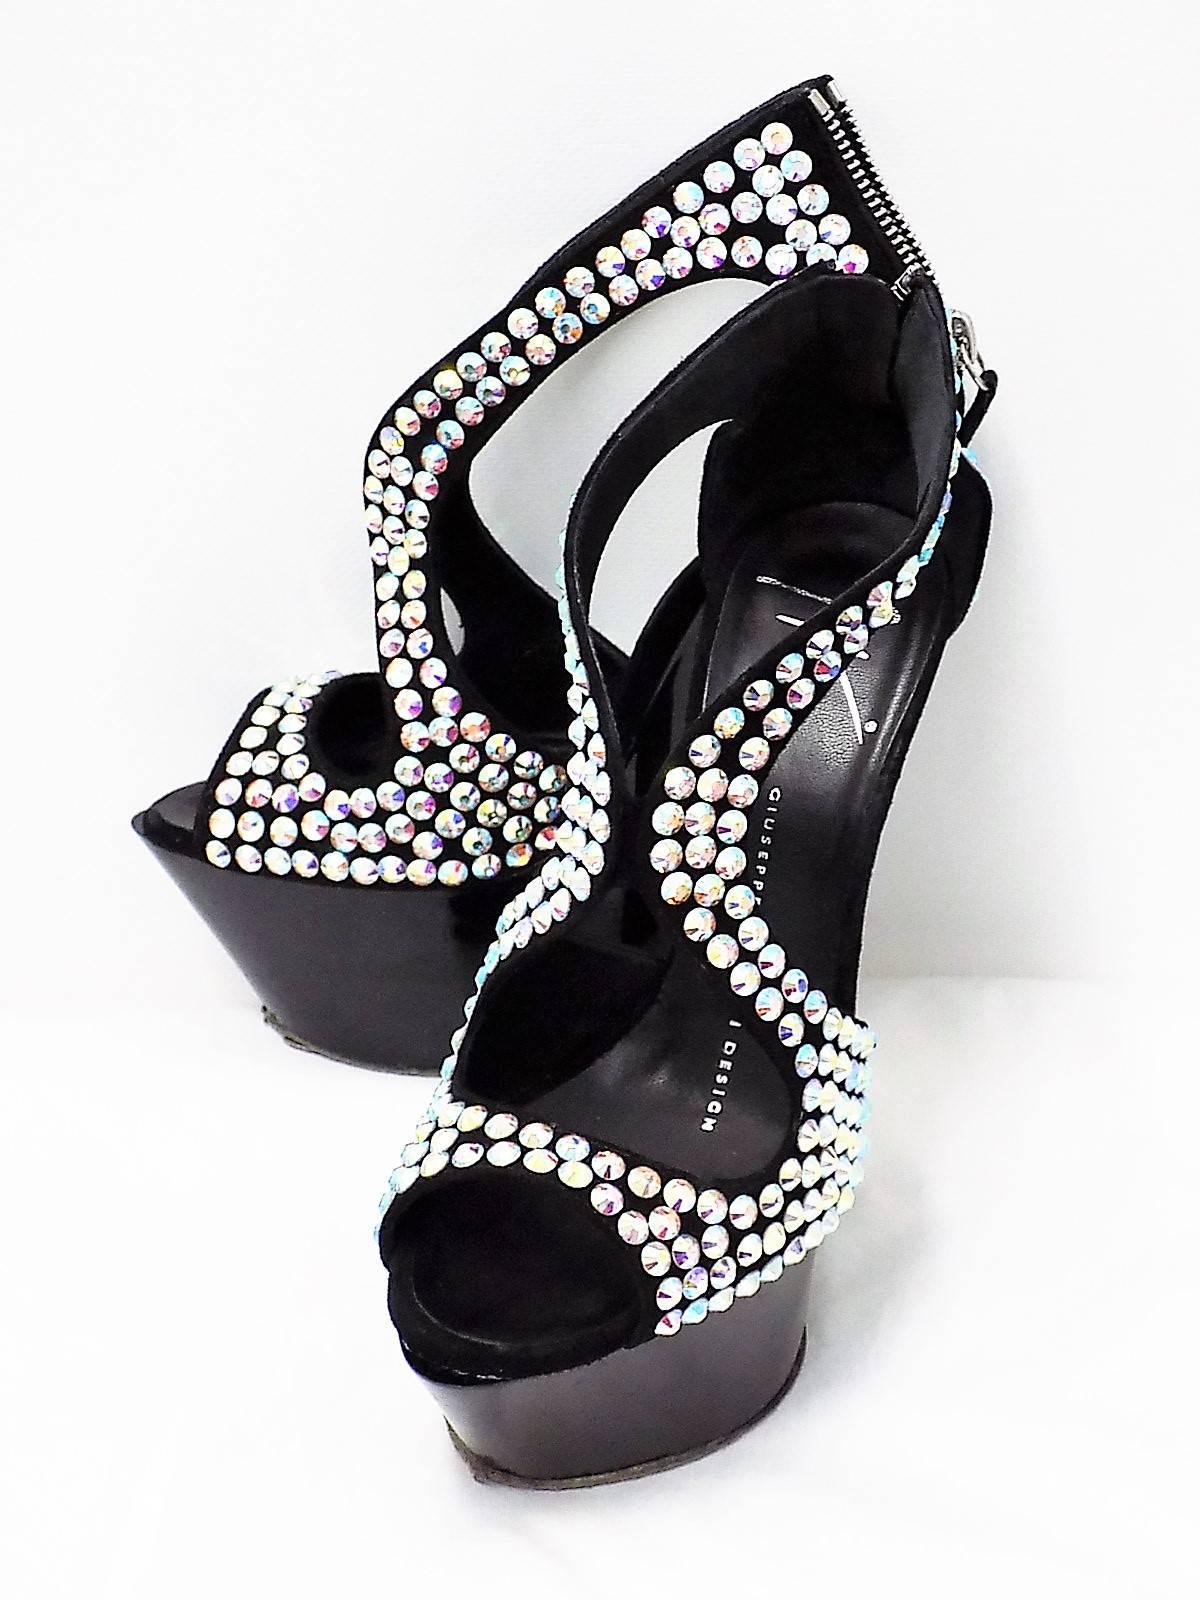 OMG!! what a shoes. You practically do not need to wear anything else!
Giuseppe Zanotti Limited Edition  Lucite platform wedges w/h large crystals .
Worn few times in excellent condition!! No signs of wear except a little on the sole. With new